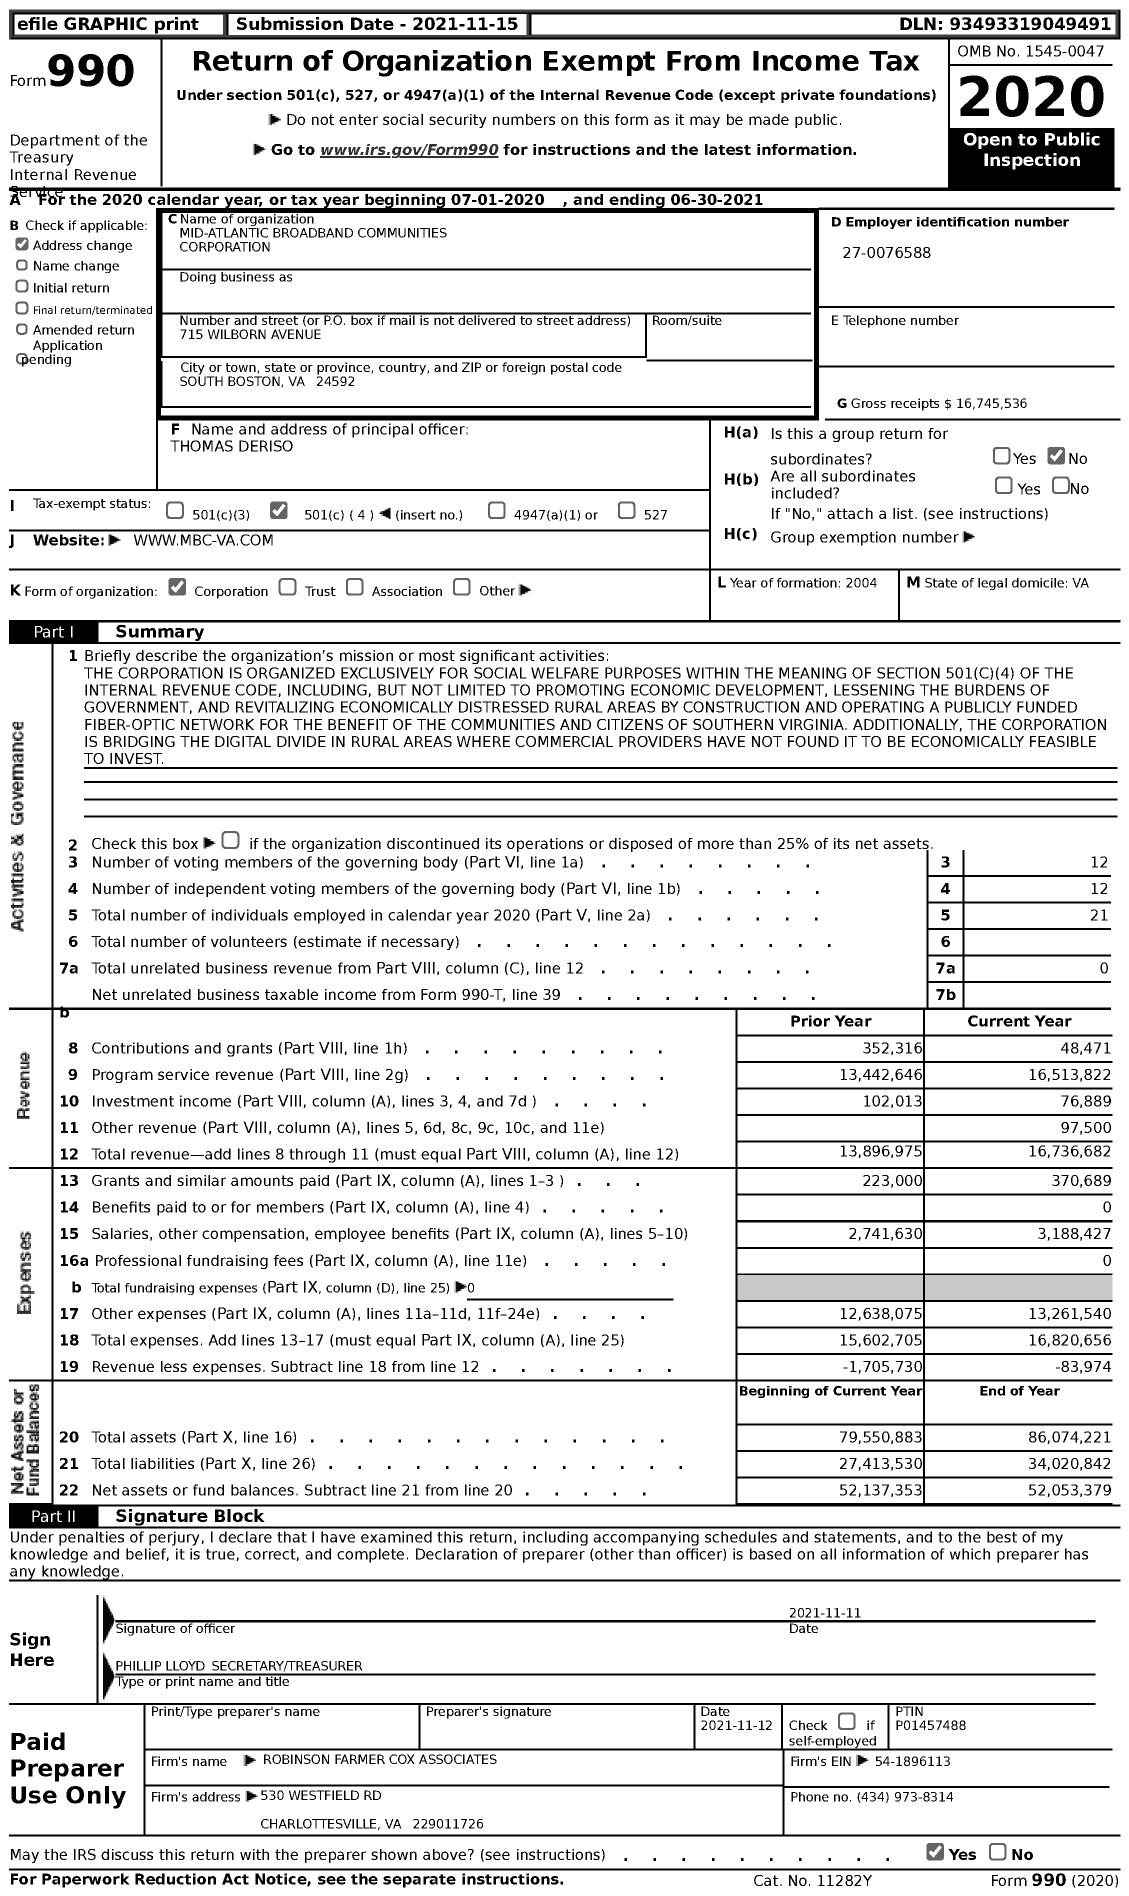 Image of first page of 2020 Form 990 for Mid-Atlantic Broadband Communities Corporation